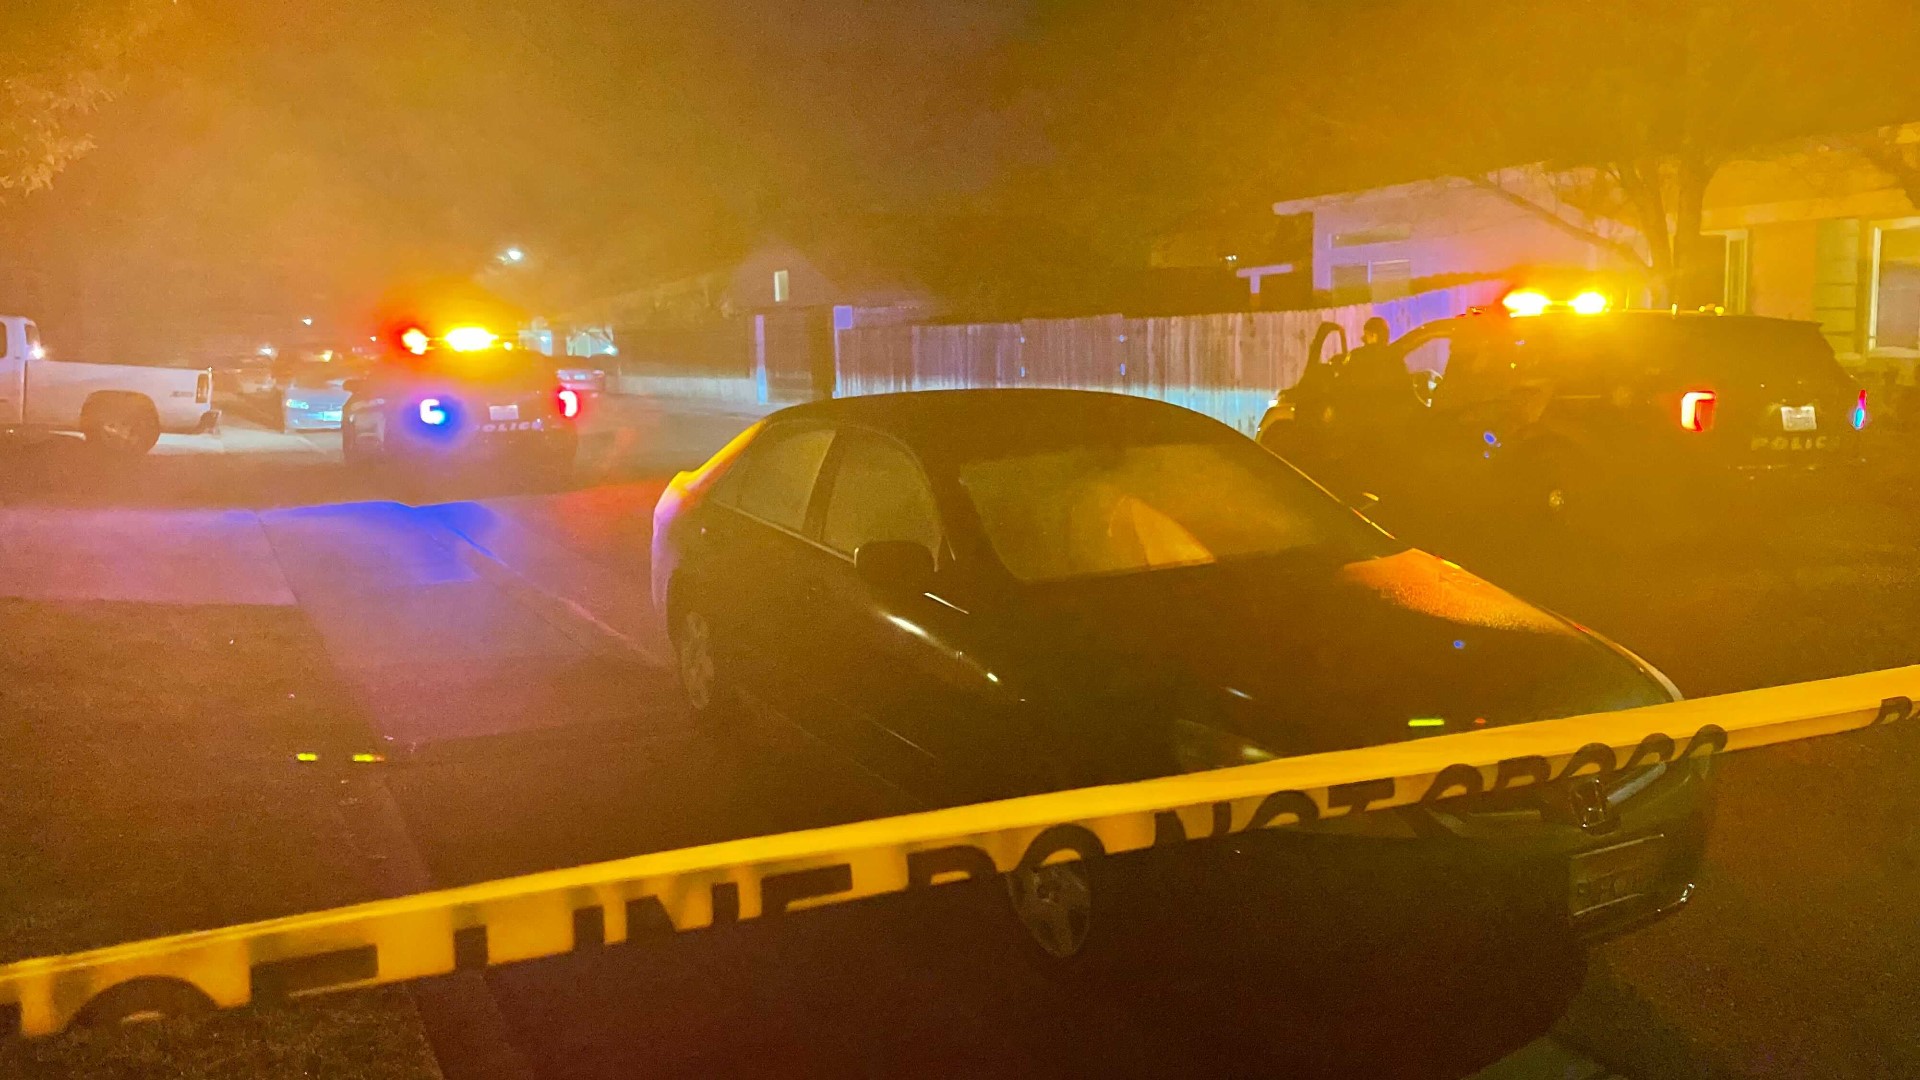 The man and woman hurt in a shooting Sunday are in stable condition, according to the Elk Grove Police Department